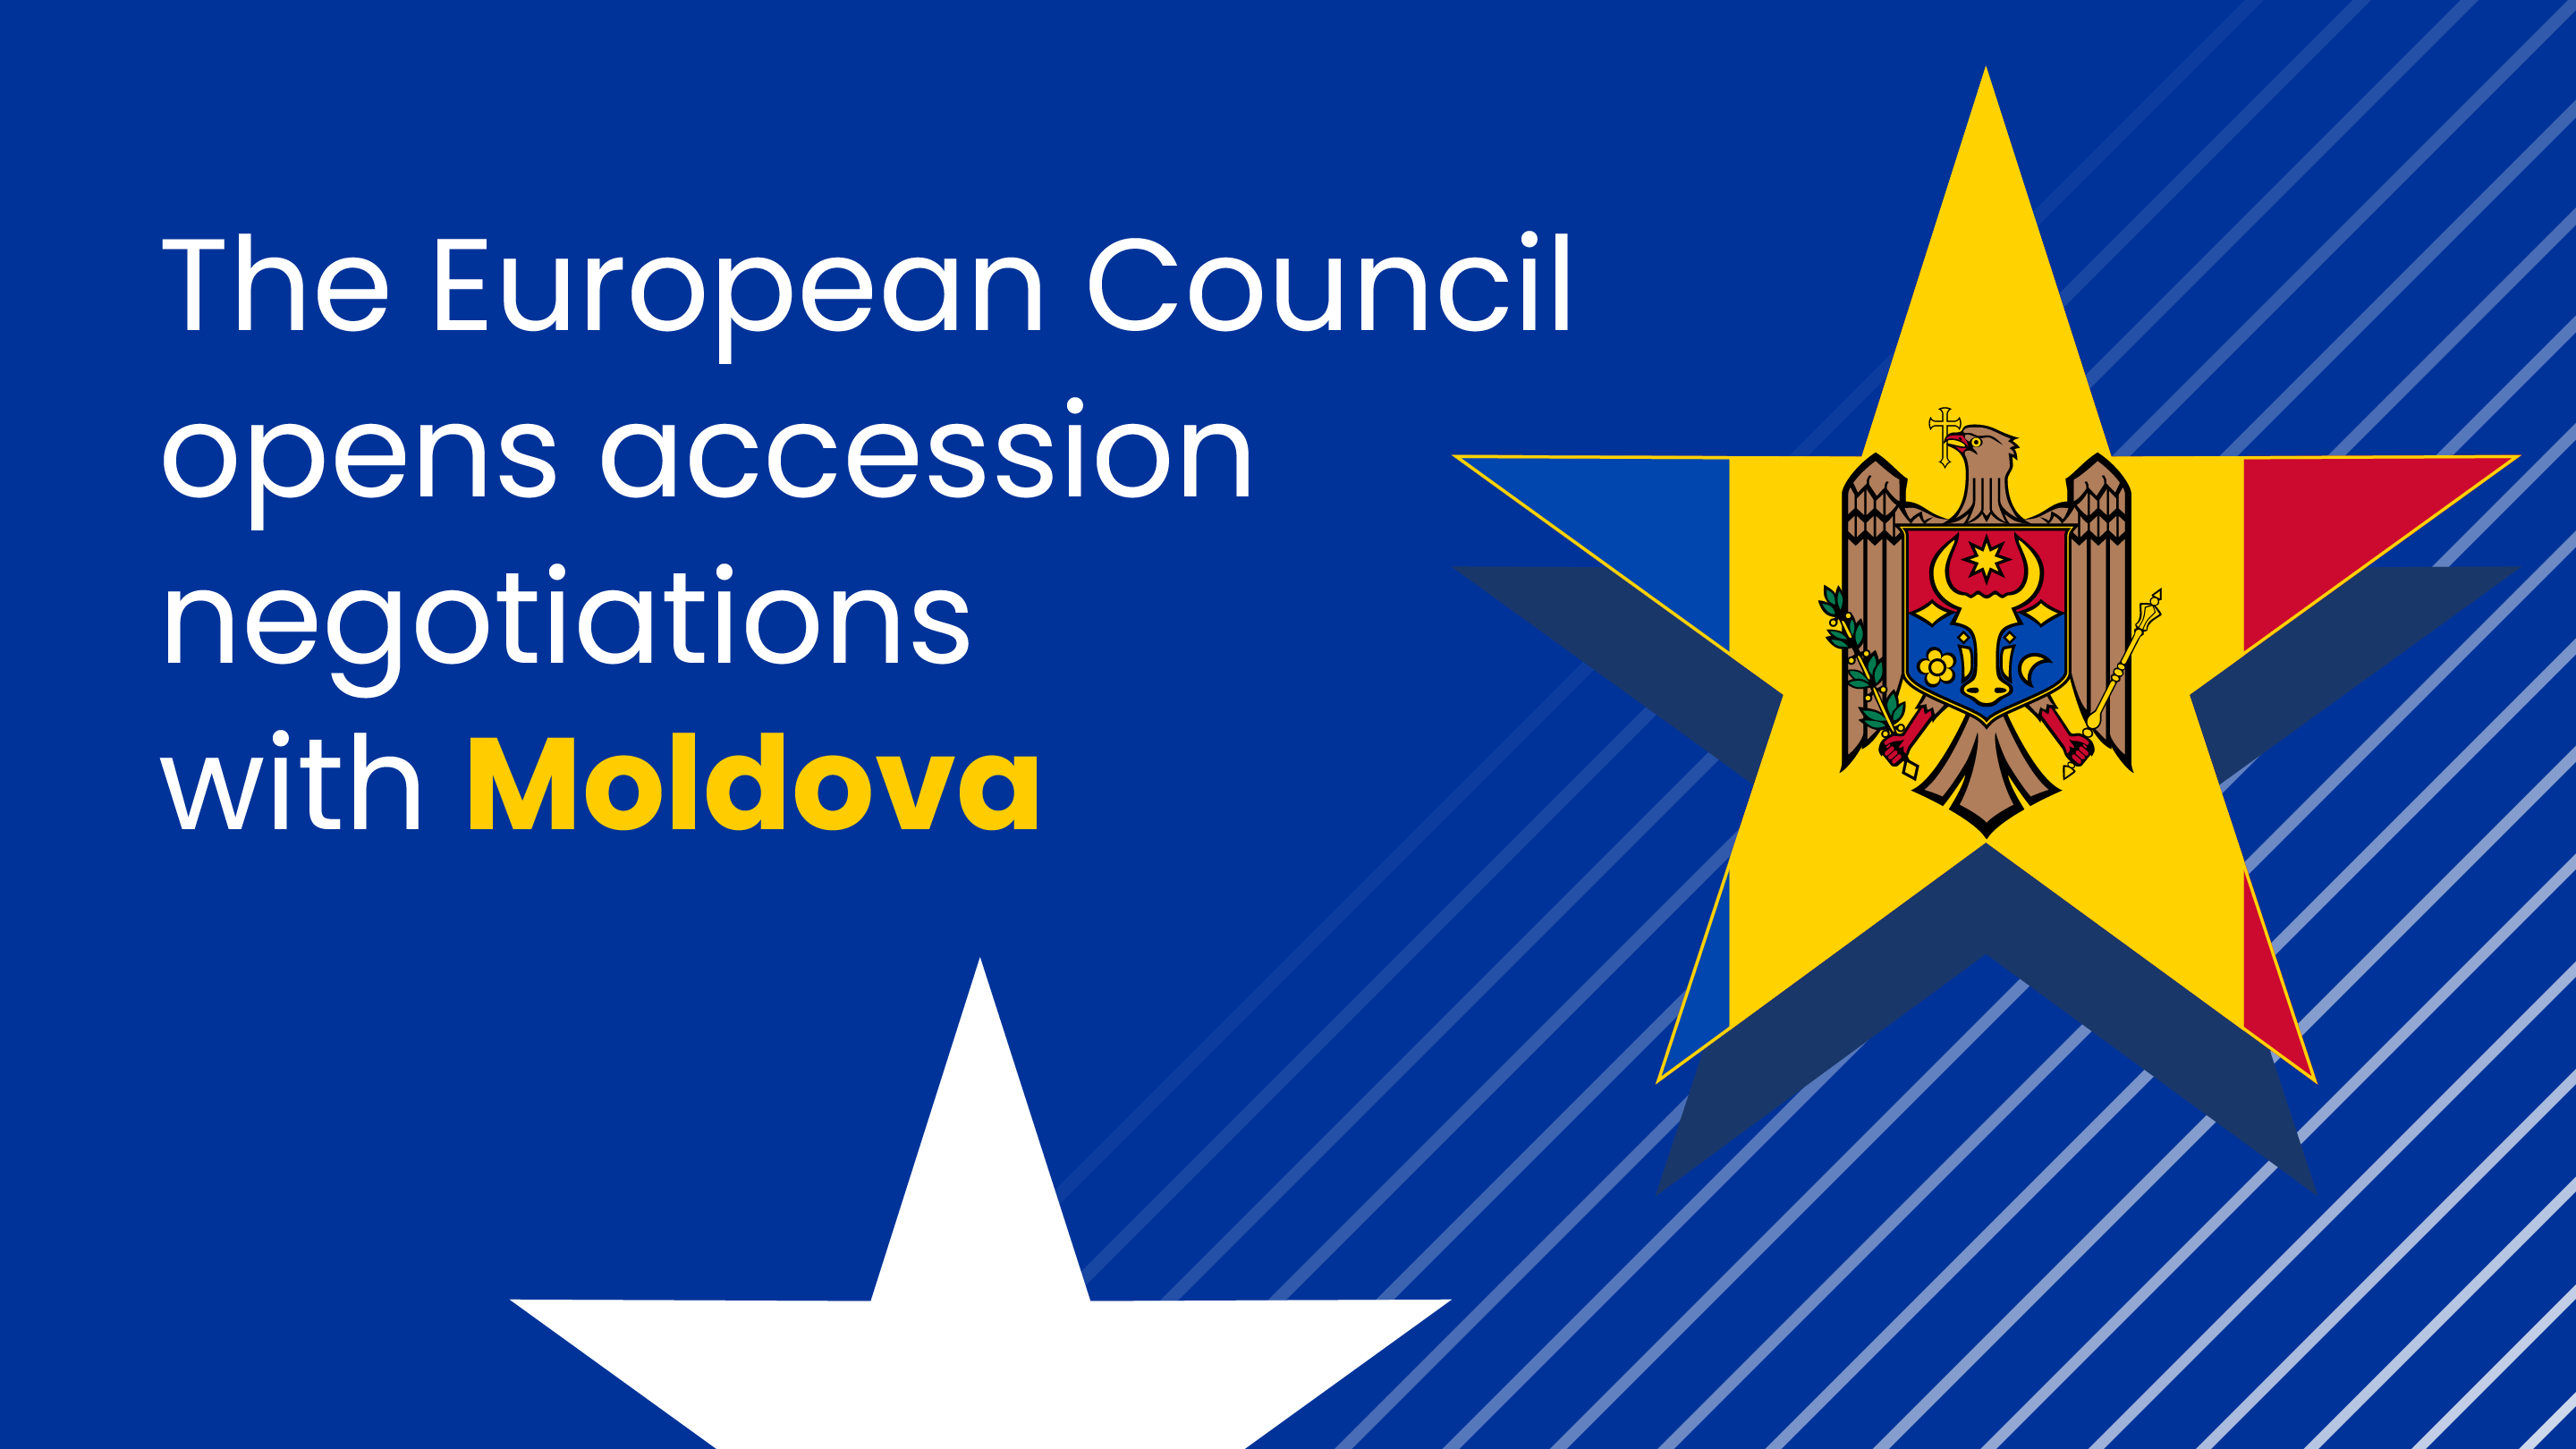 The European Council opens accession negotiations with Moldova, featuring a dynamic design with a blue background and diagonal pinstripes, a large yellow star with the Moldovan coat of arms, and prominent text